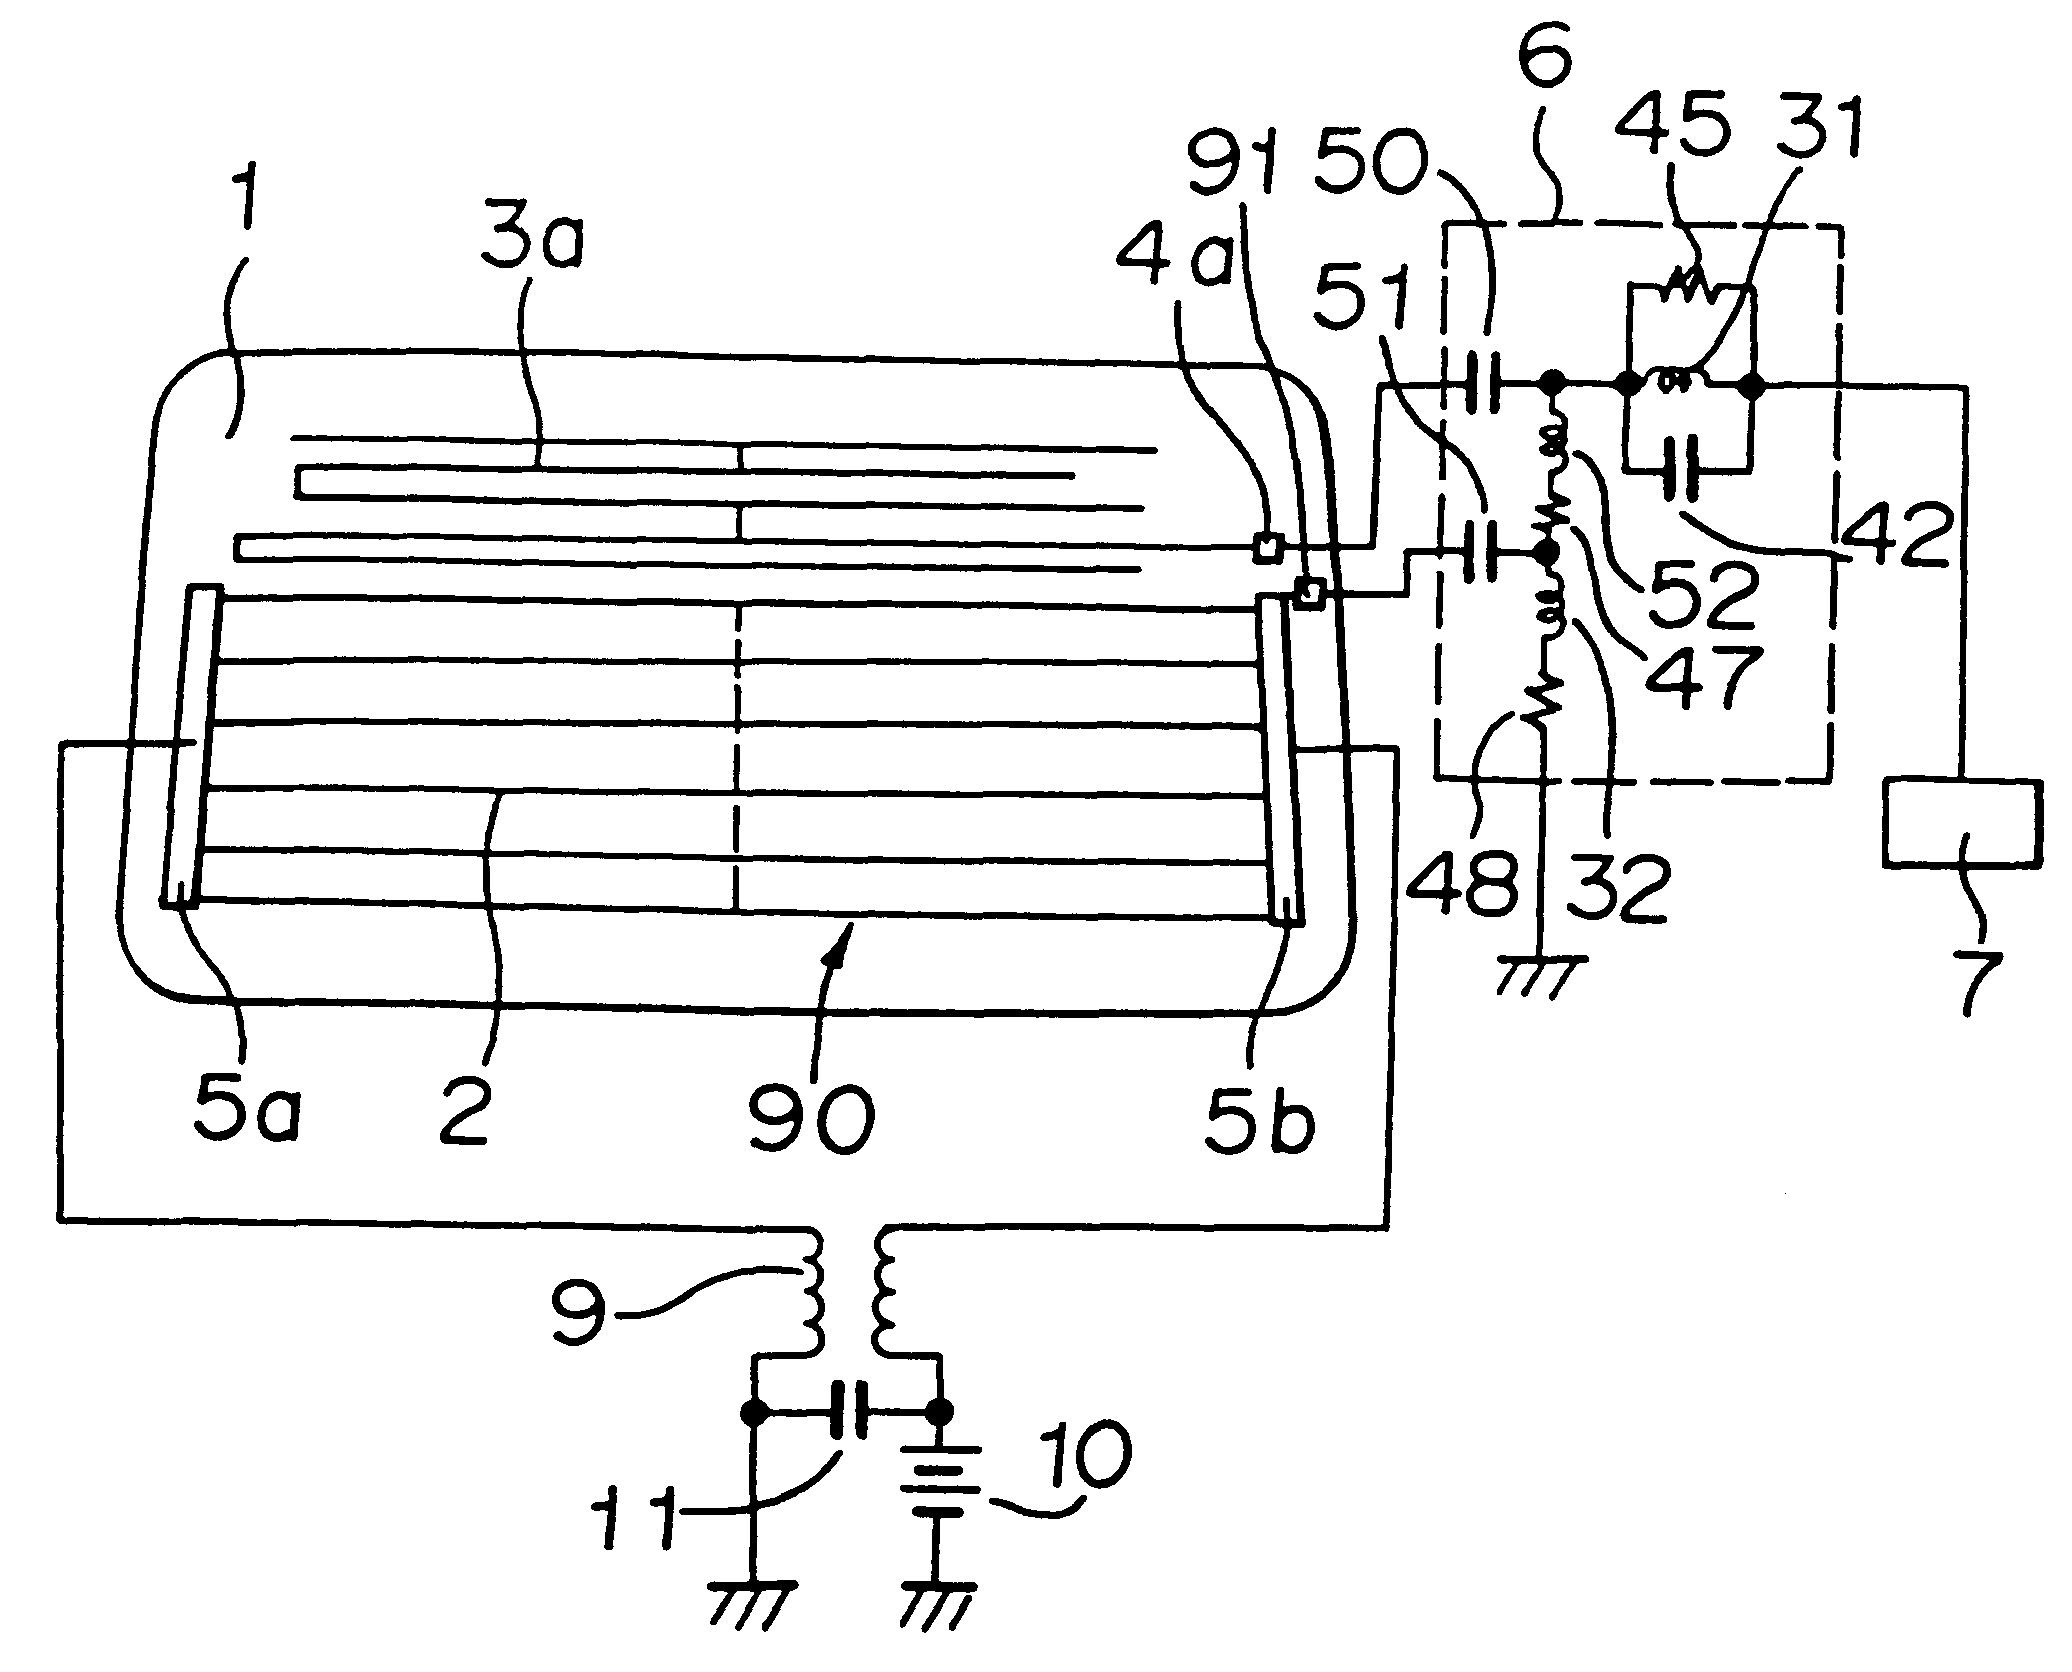 Glass antenna device for an automobile